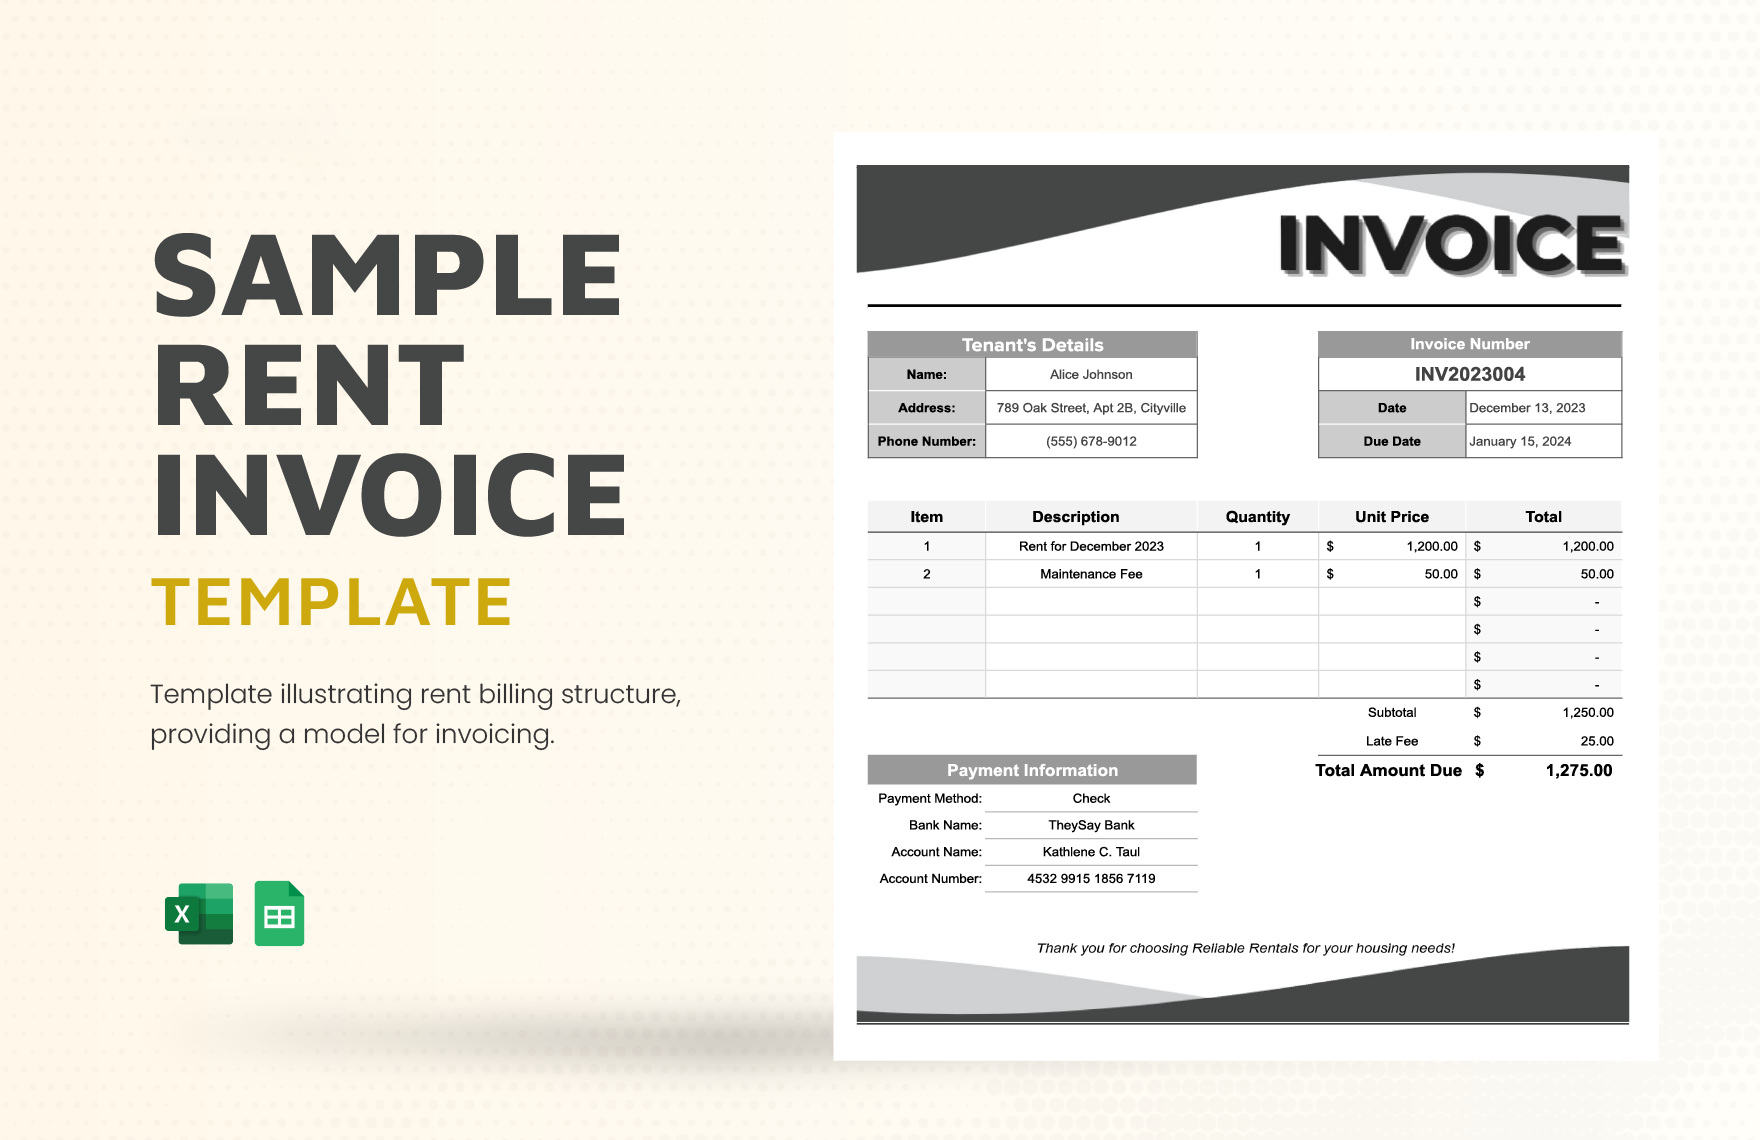 Sample Rent Invoice Template in Excel, Google Sheets